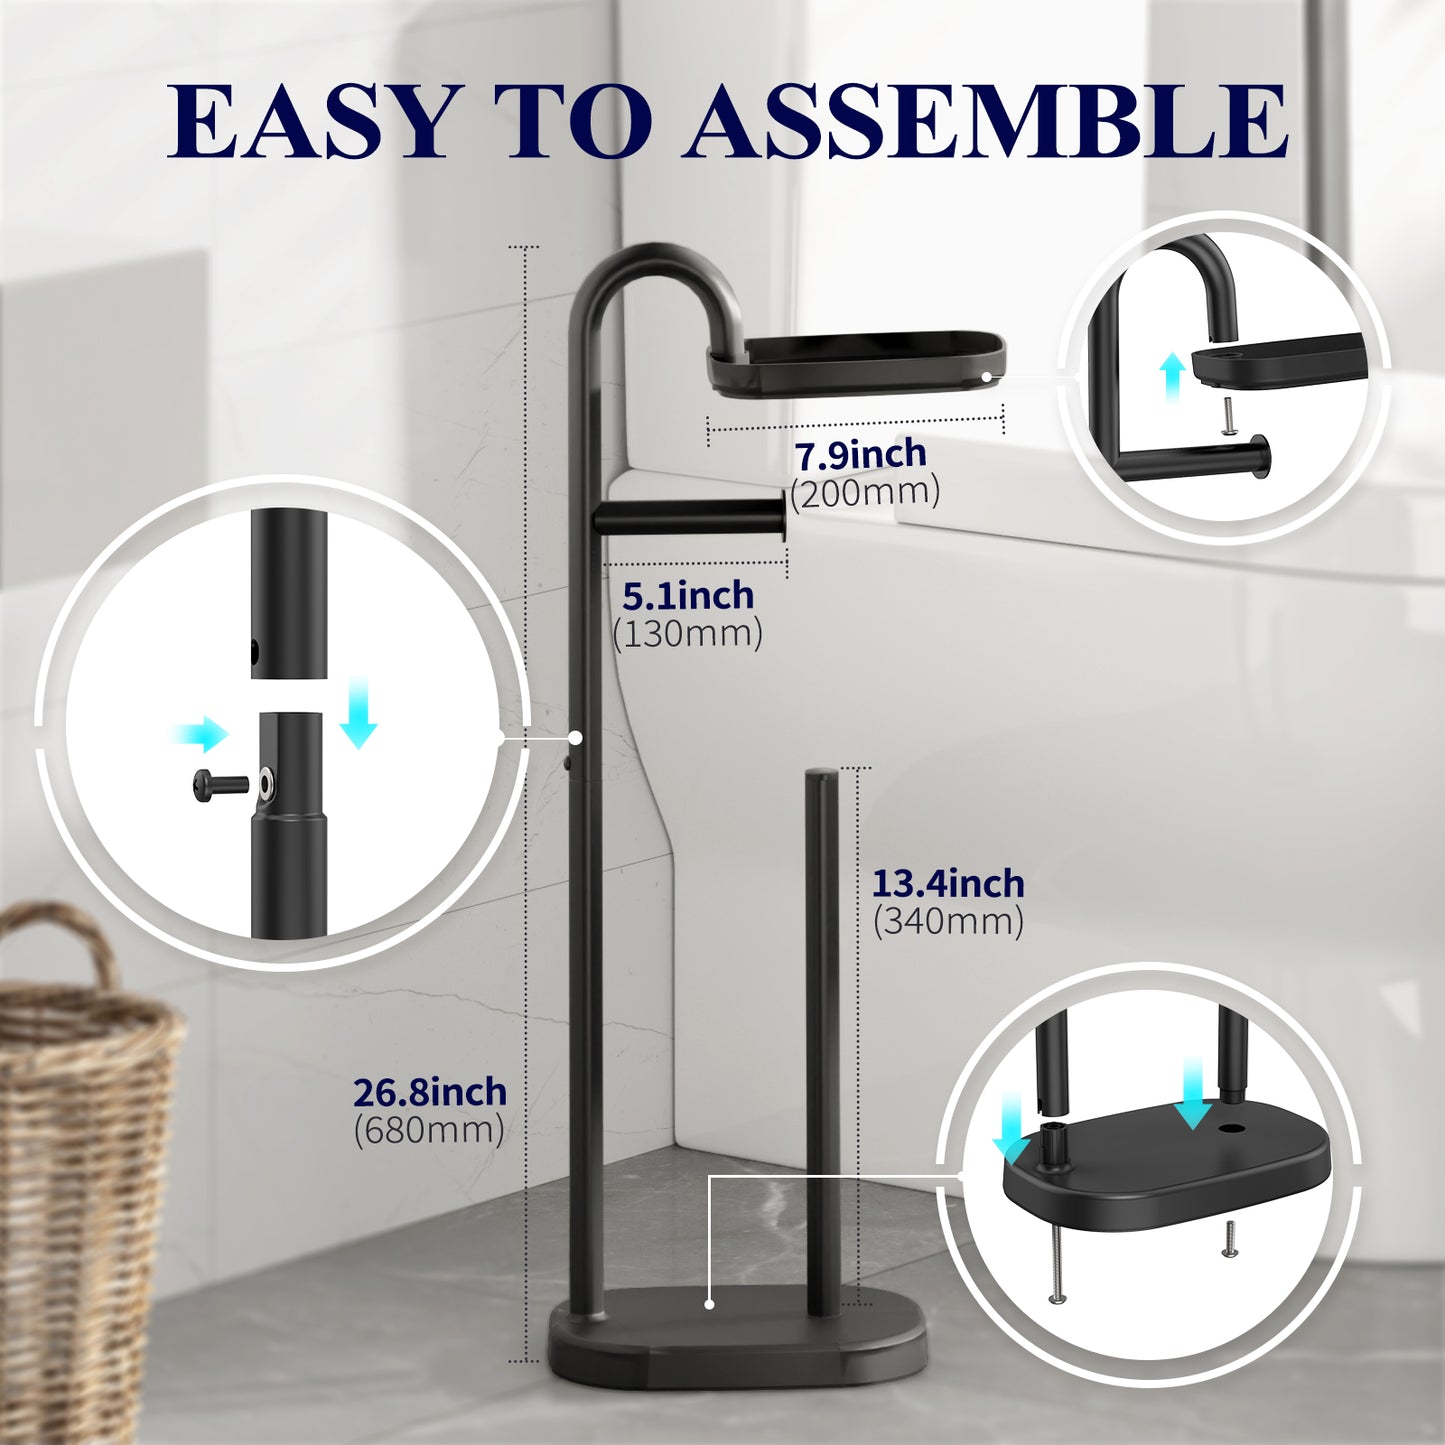 Kitsure Toilet Paper Holder Stand - Free-Standing with a Weighted Base, Durable & Rustless Shelf and Storage Design (439)